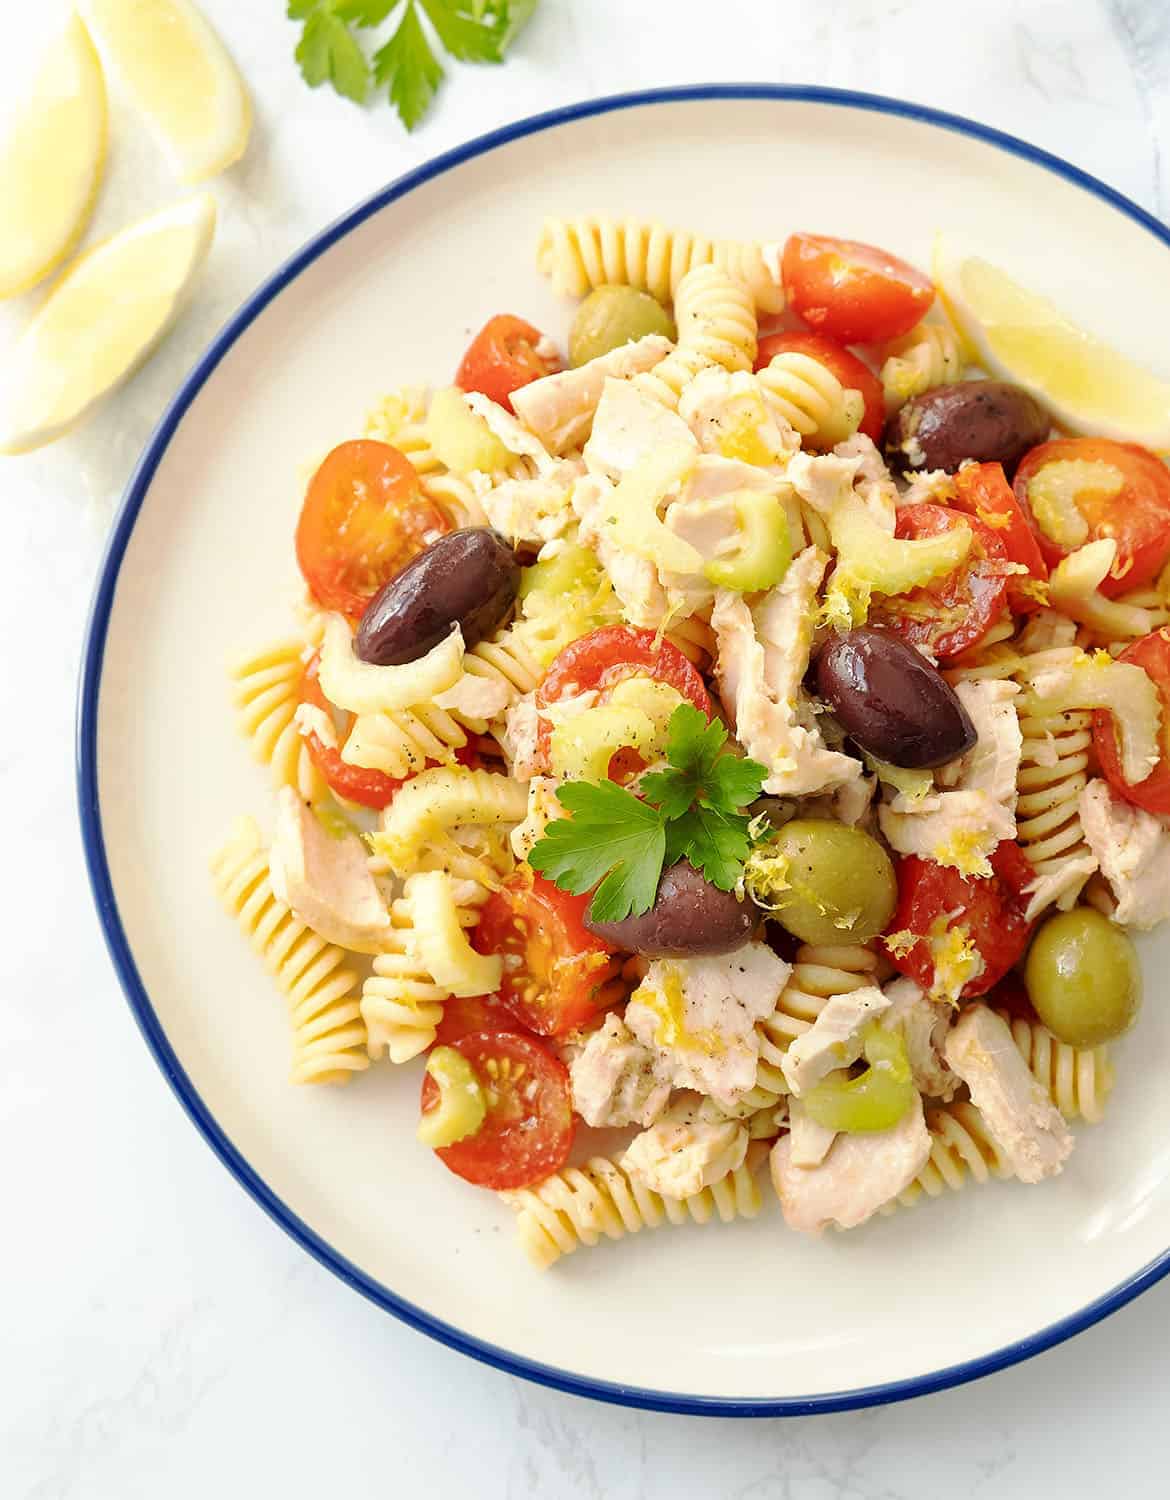 Tuna pasta salad with cherry tomatoes and olives on a white plate with a blue rim.